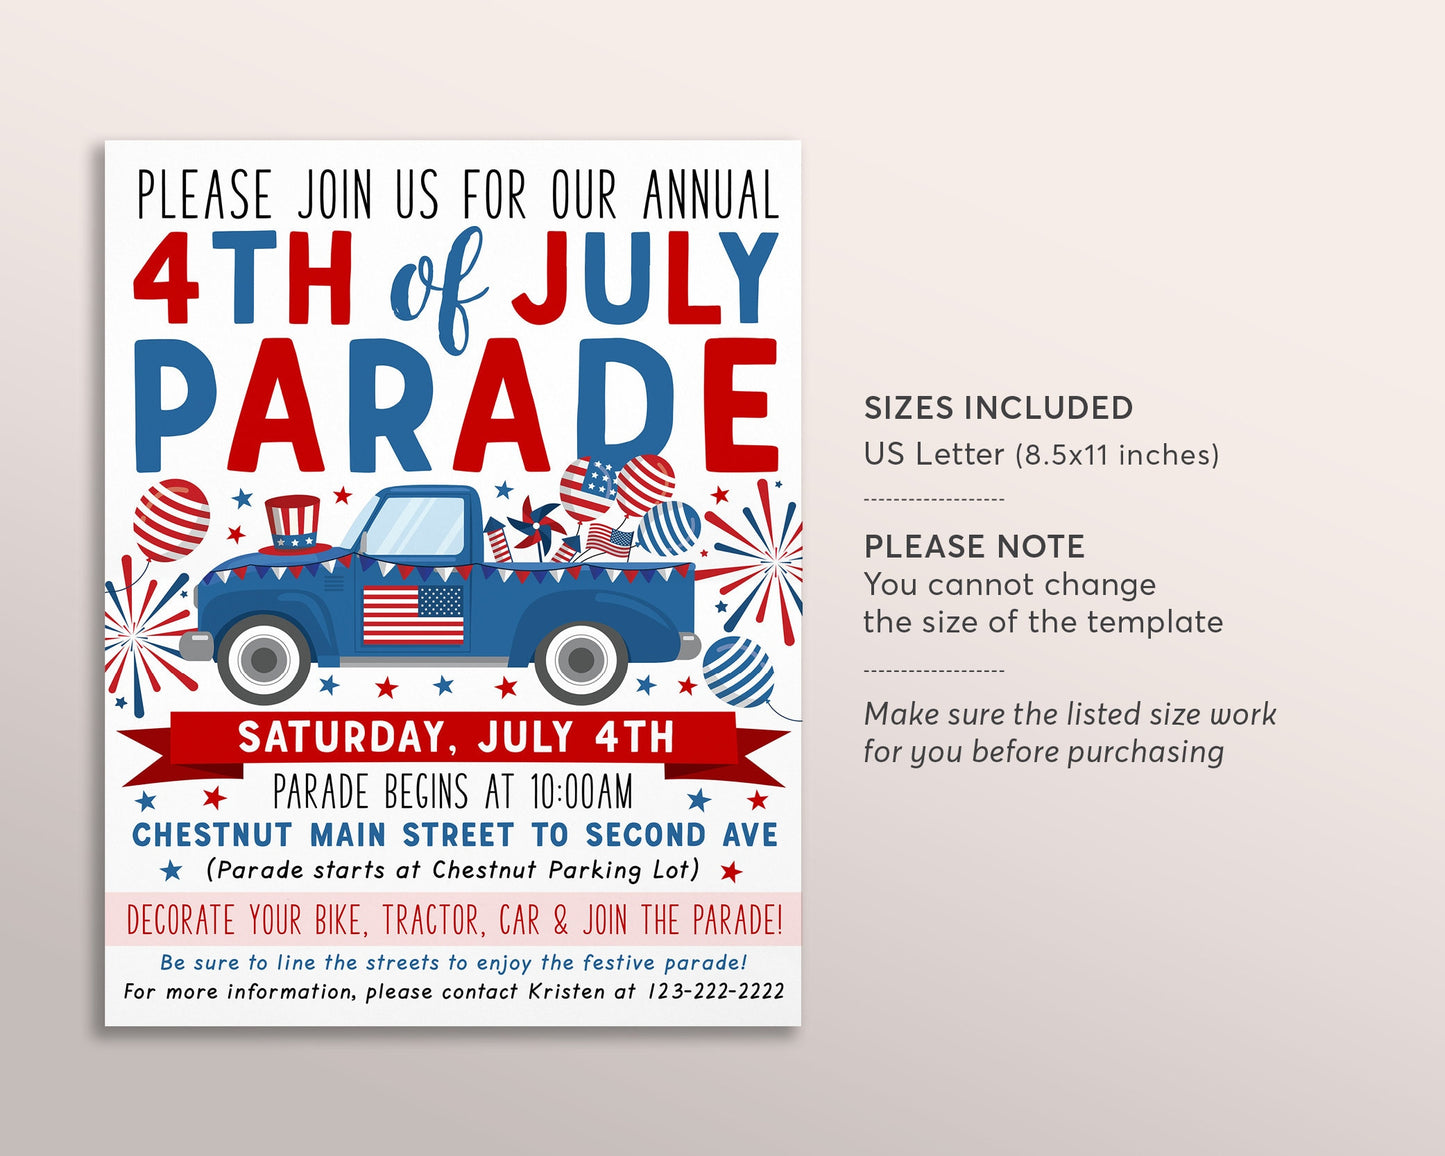 4th of July Car Parade Flyer Invitation Editable Template, Decorated Bike Truck Tractor Bicycle Tricycle Parade, Stars And Stripes